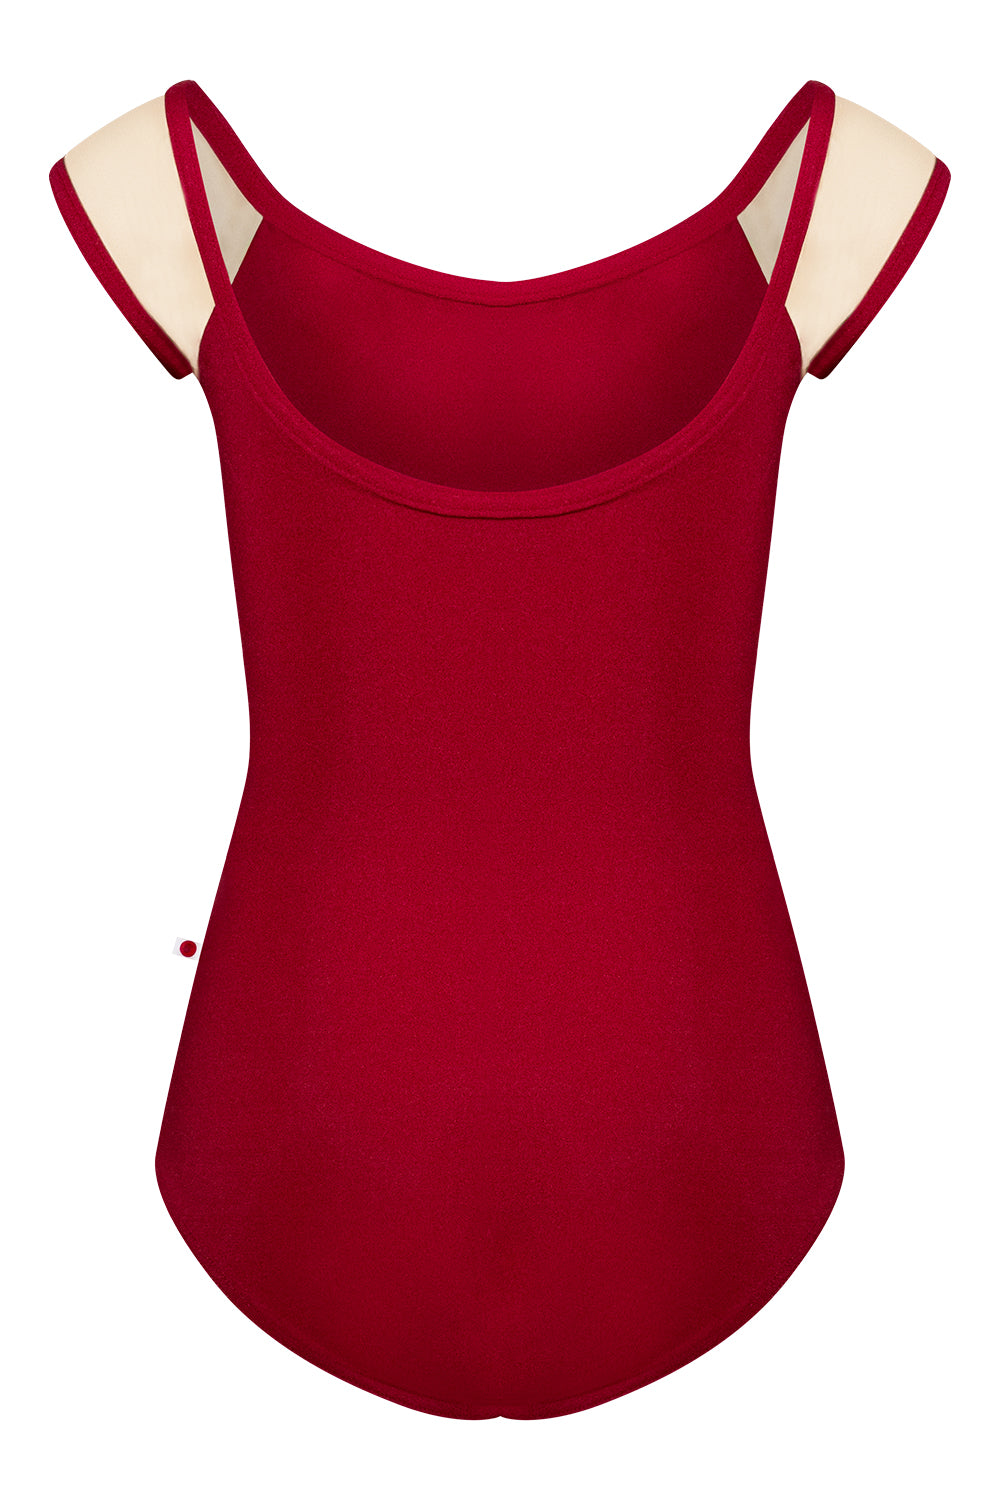 Kids Wendy leotard in N-Berry body color with Mesh Tone 3 sleeve color and N-Berry trim color